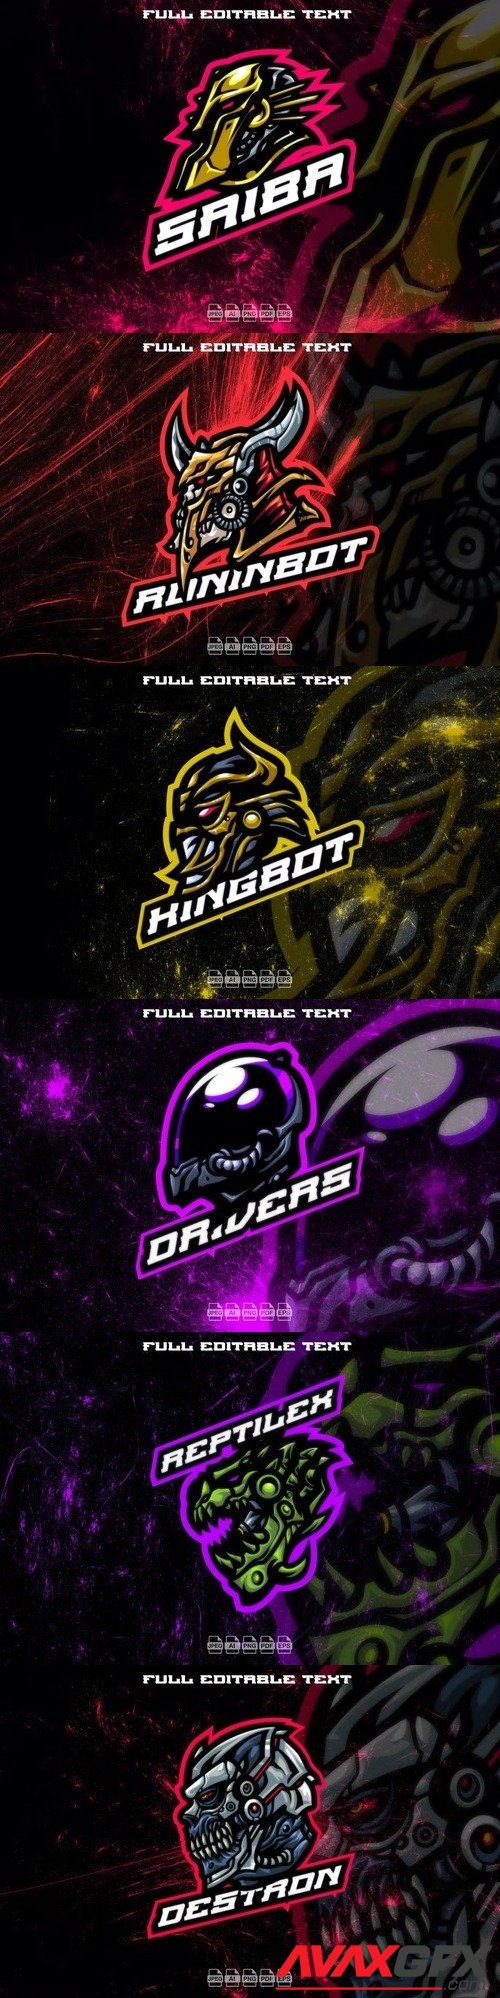 6 Cyber Robot Head Mascot Logos for Gaming and Sports